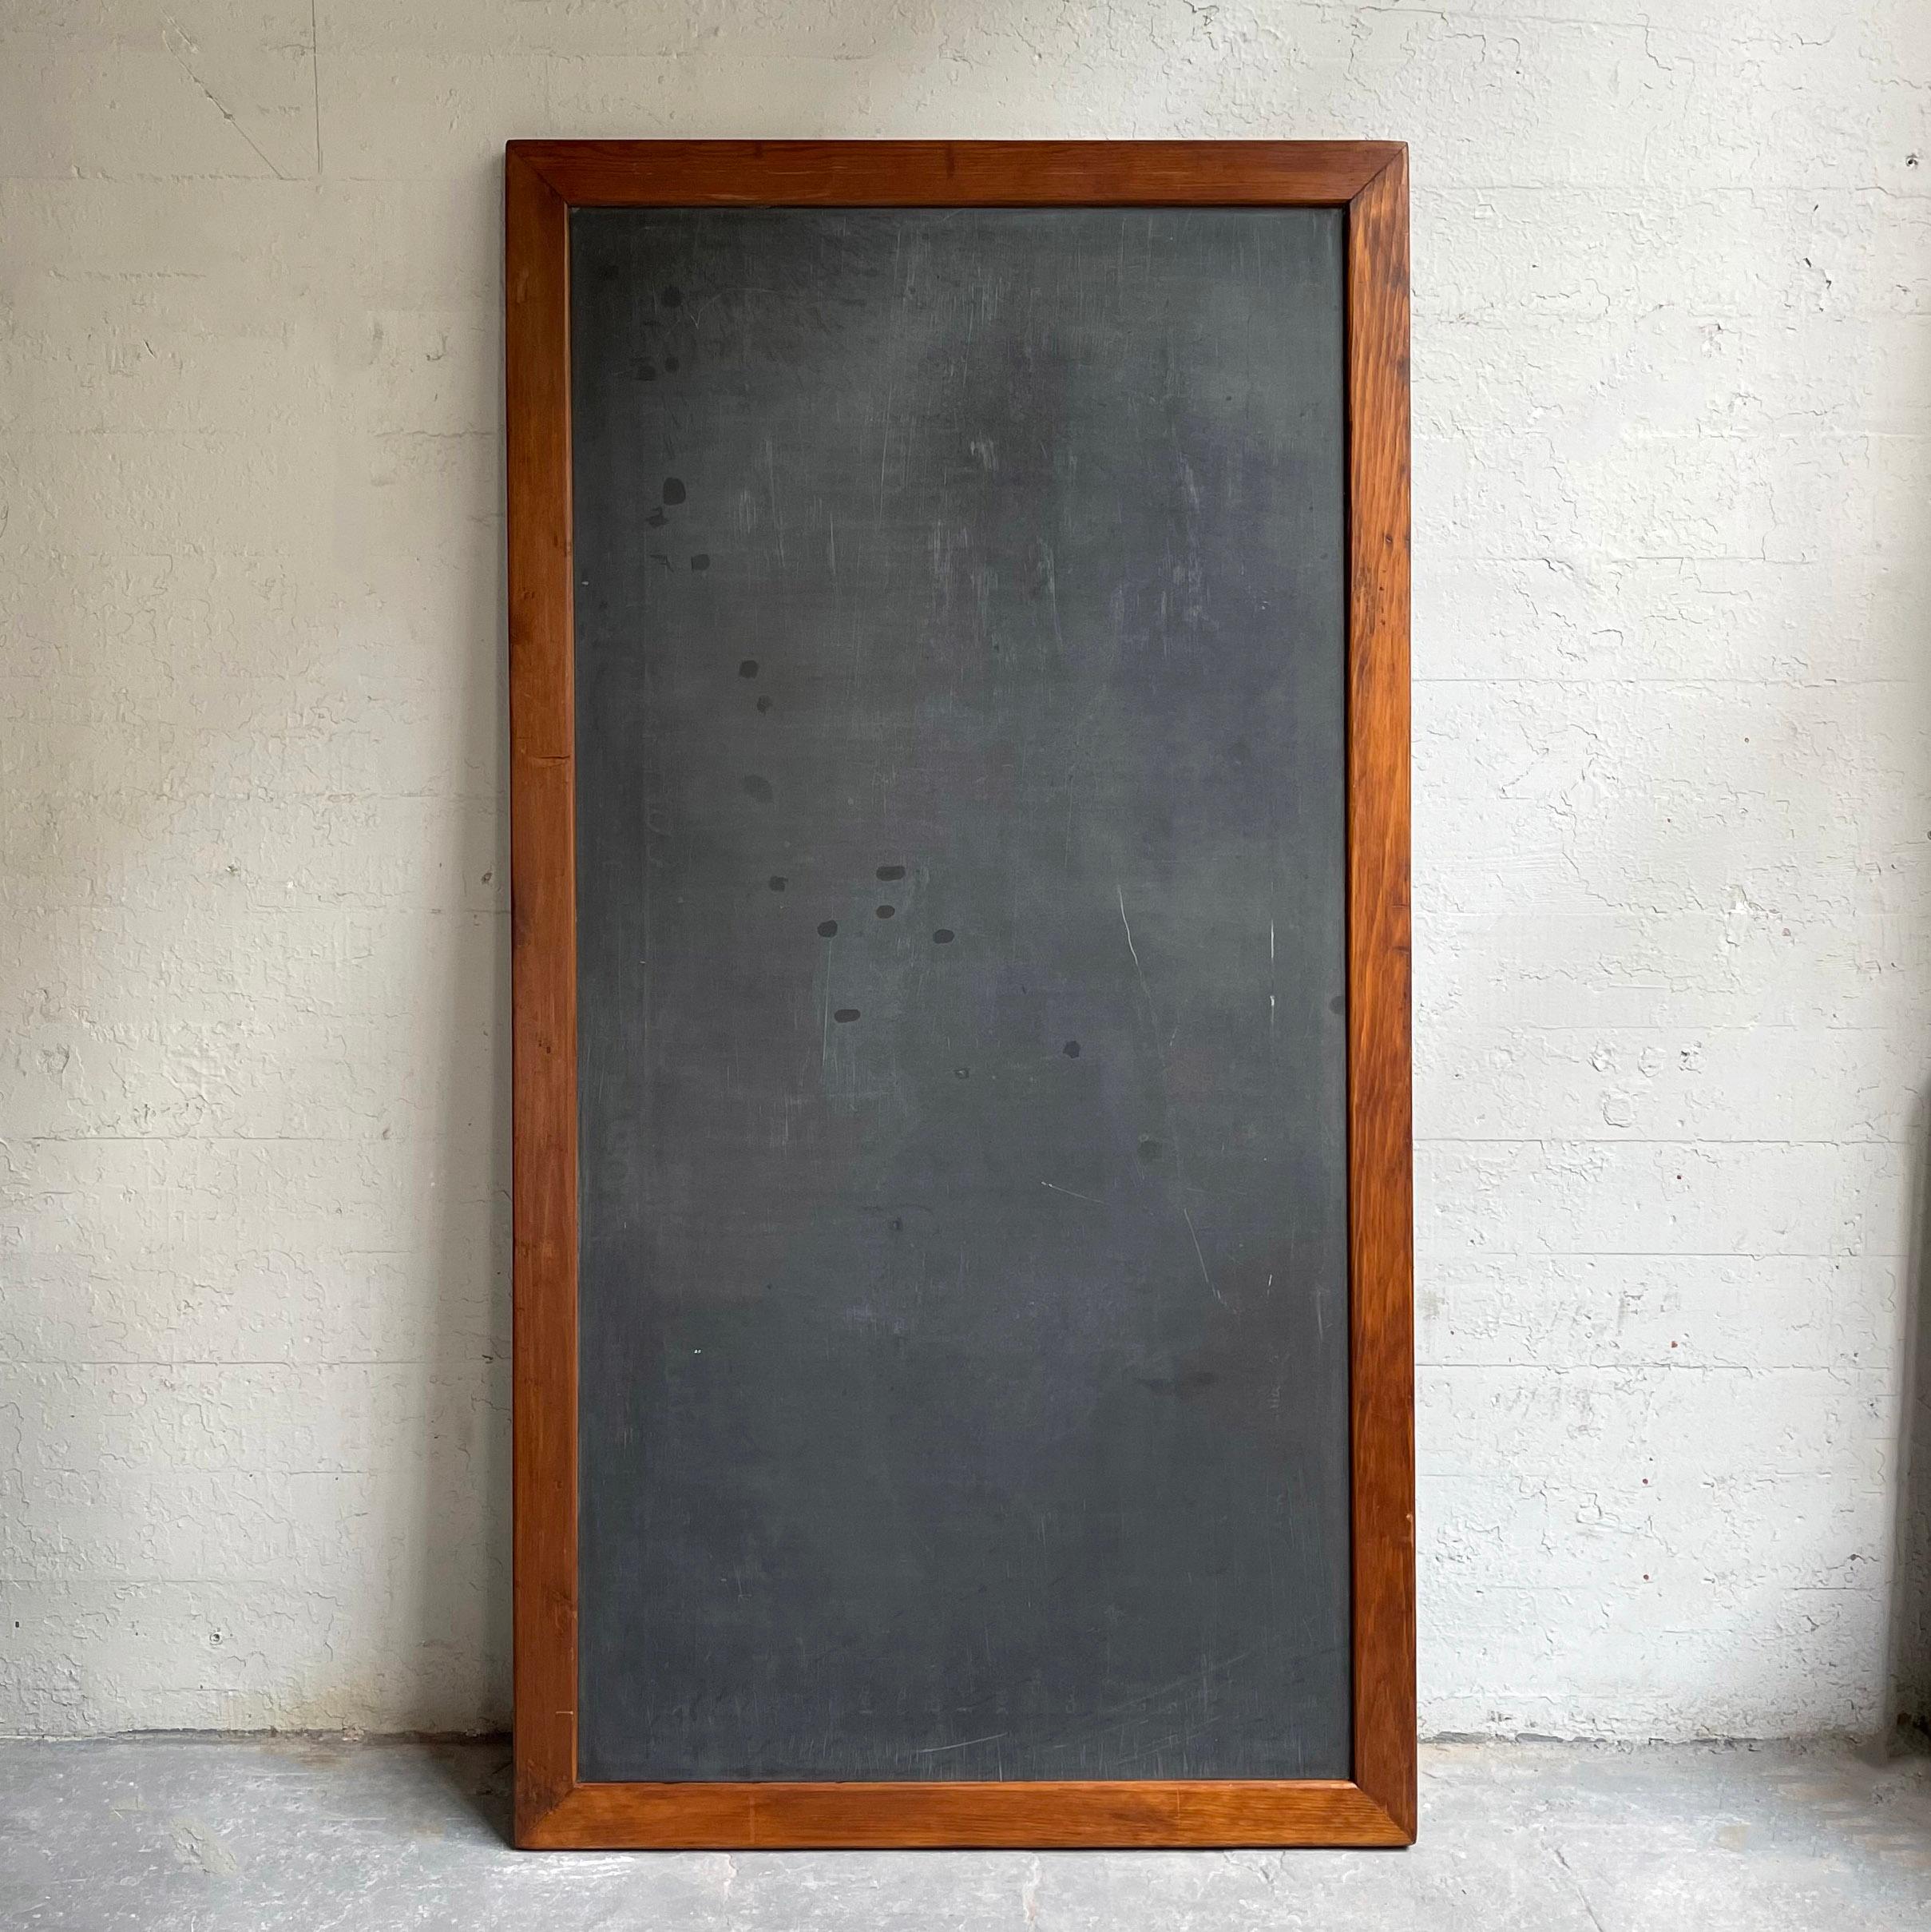 Impressively large, industrial, midcentury, schoolhouse, slate, chalkboard with a pine frame can be used vertically or horizontally and looks great leaning.